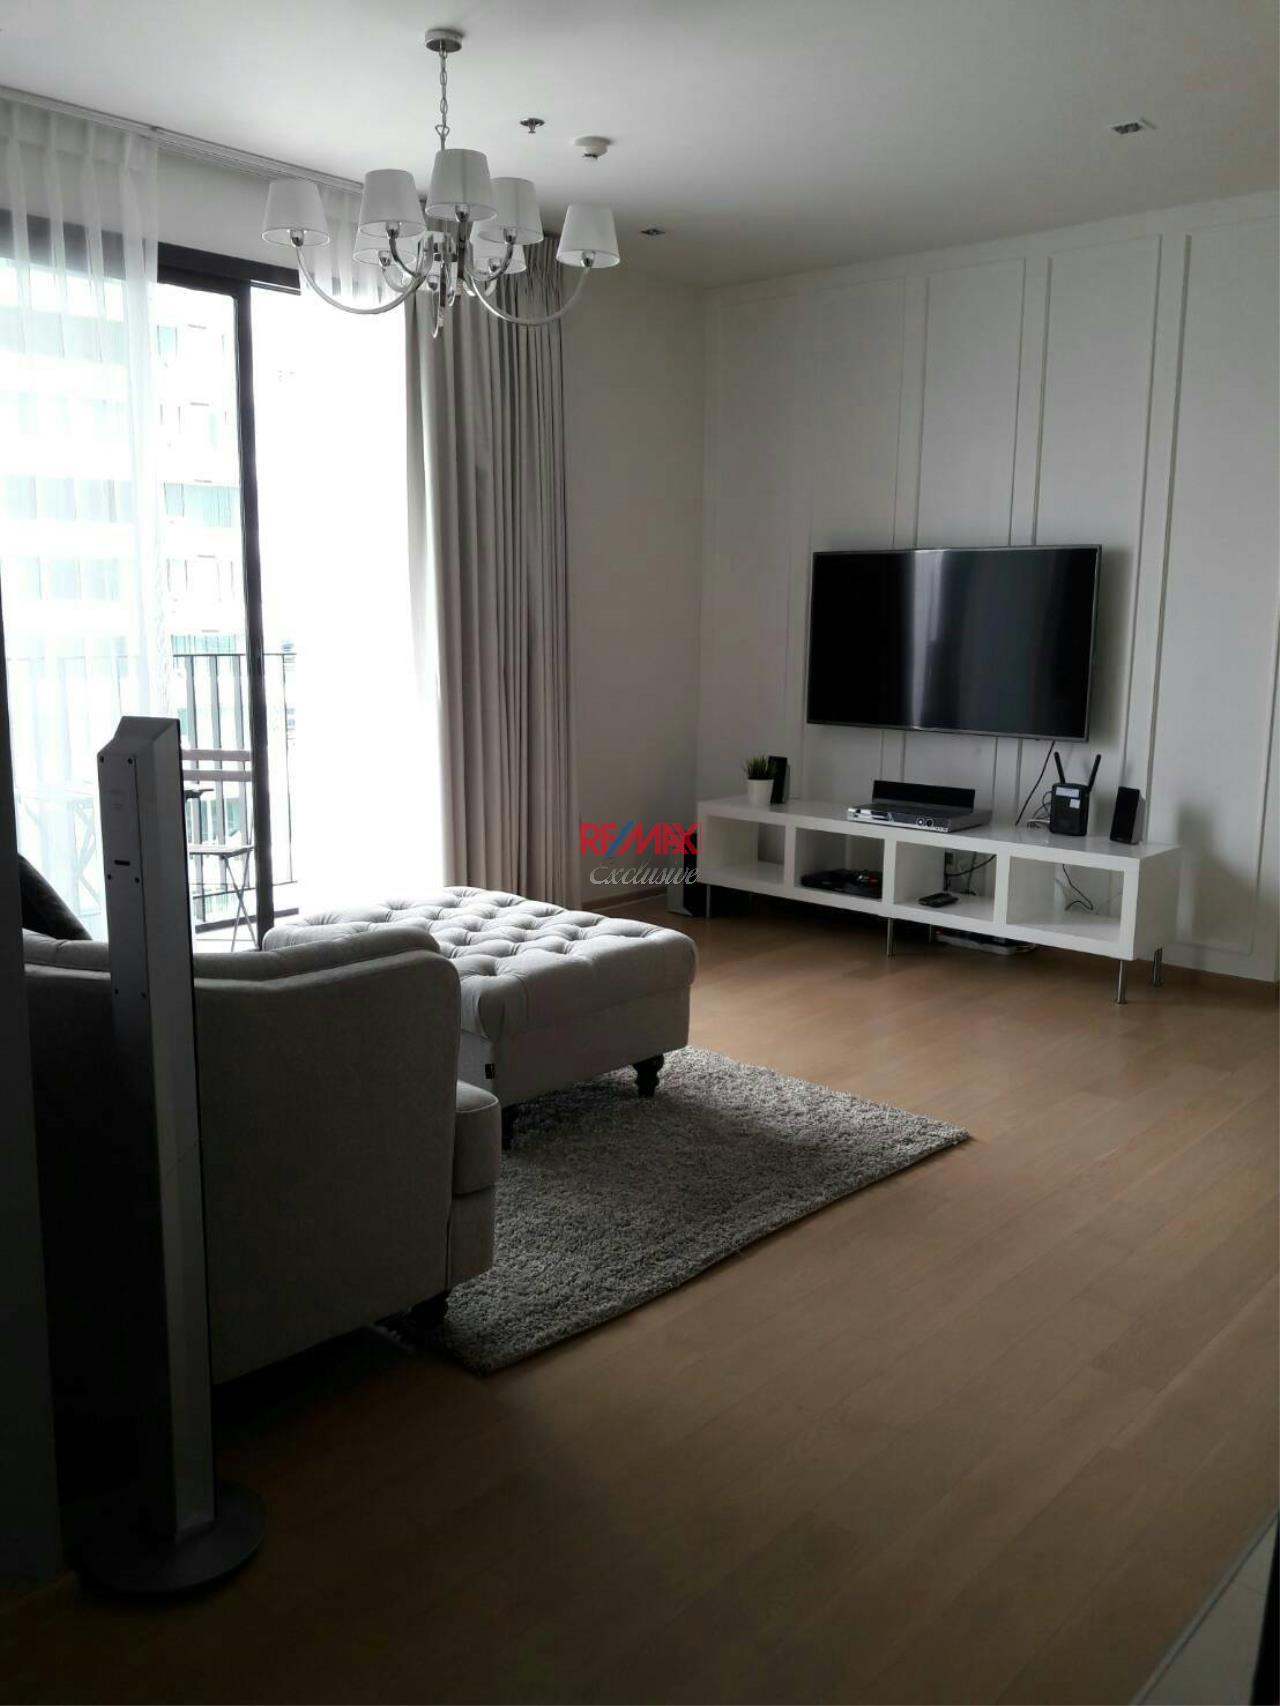 RE/MAX Exclusive Agency's HQ Thonglor 2 Bedrooms, 2 Bathrooms For Rent 75,000 THB!! 3